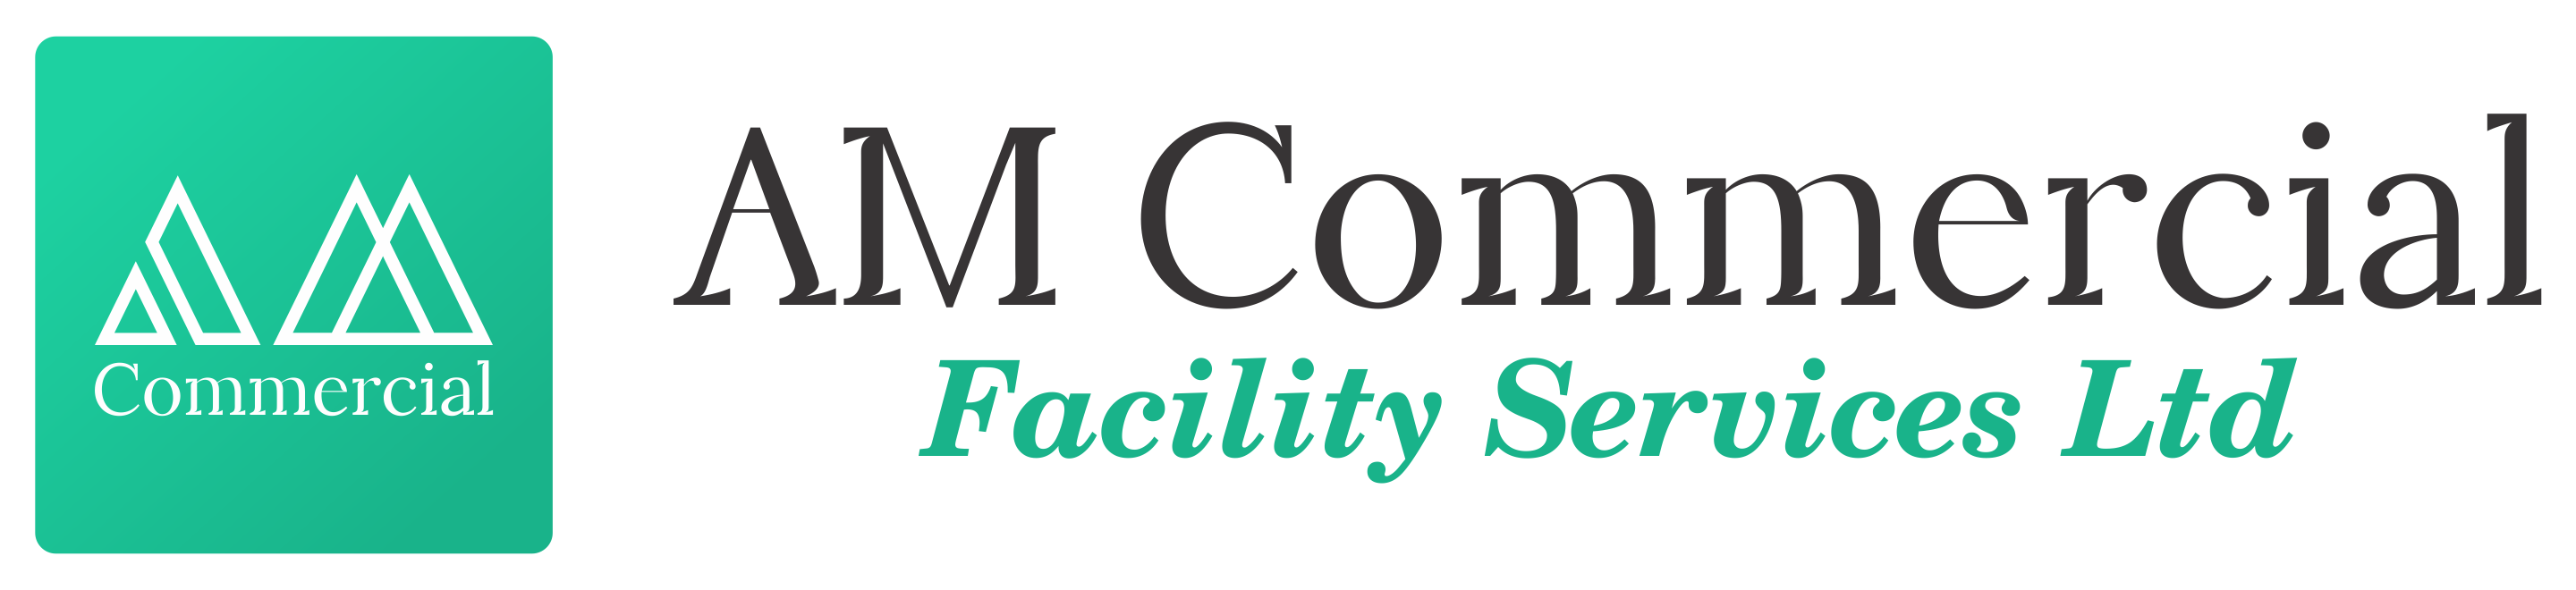 AM Commercial Facility Services